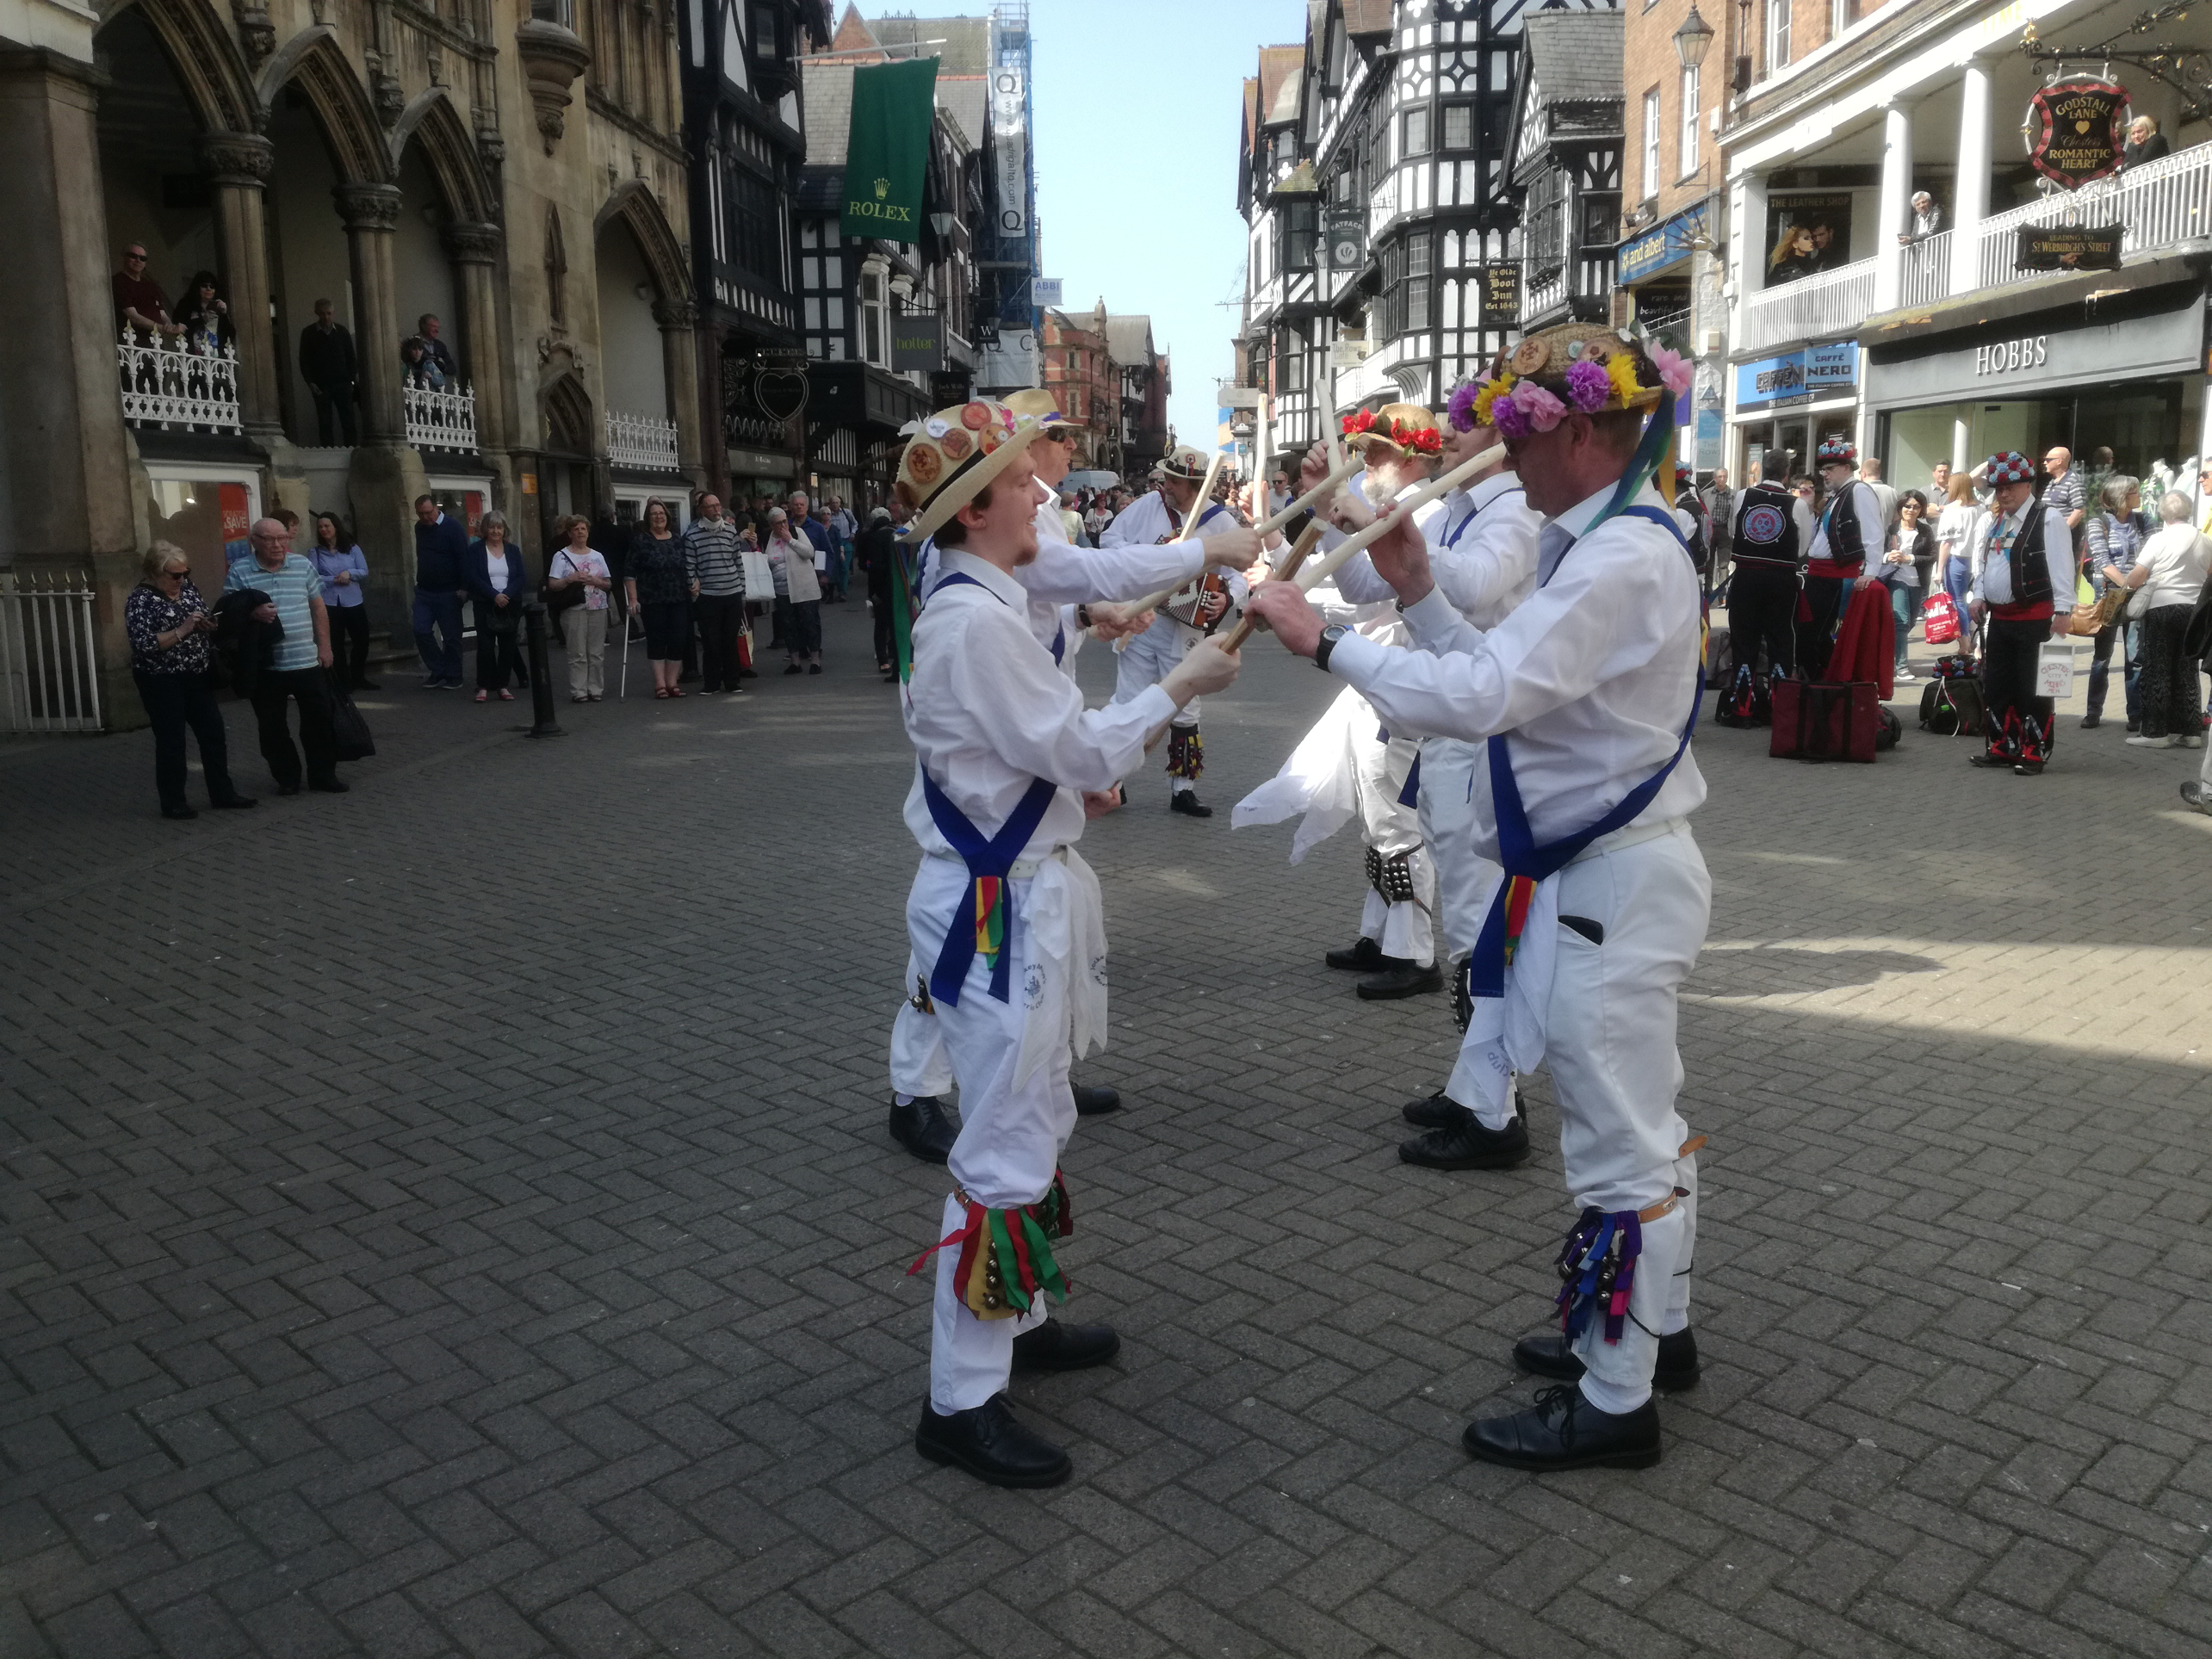 Dancing Lads a Bunchem Dancing in Chester - April 2018